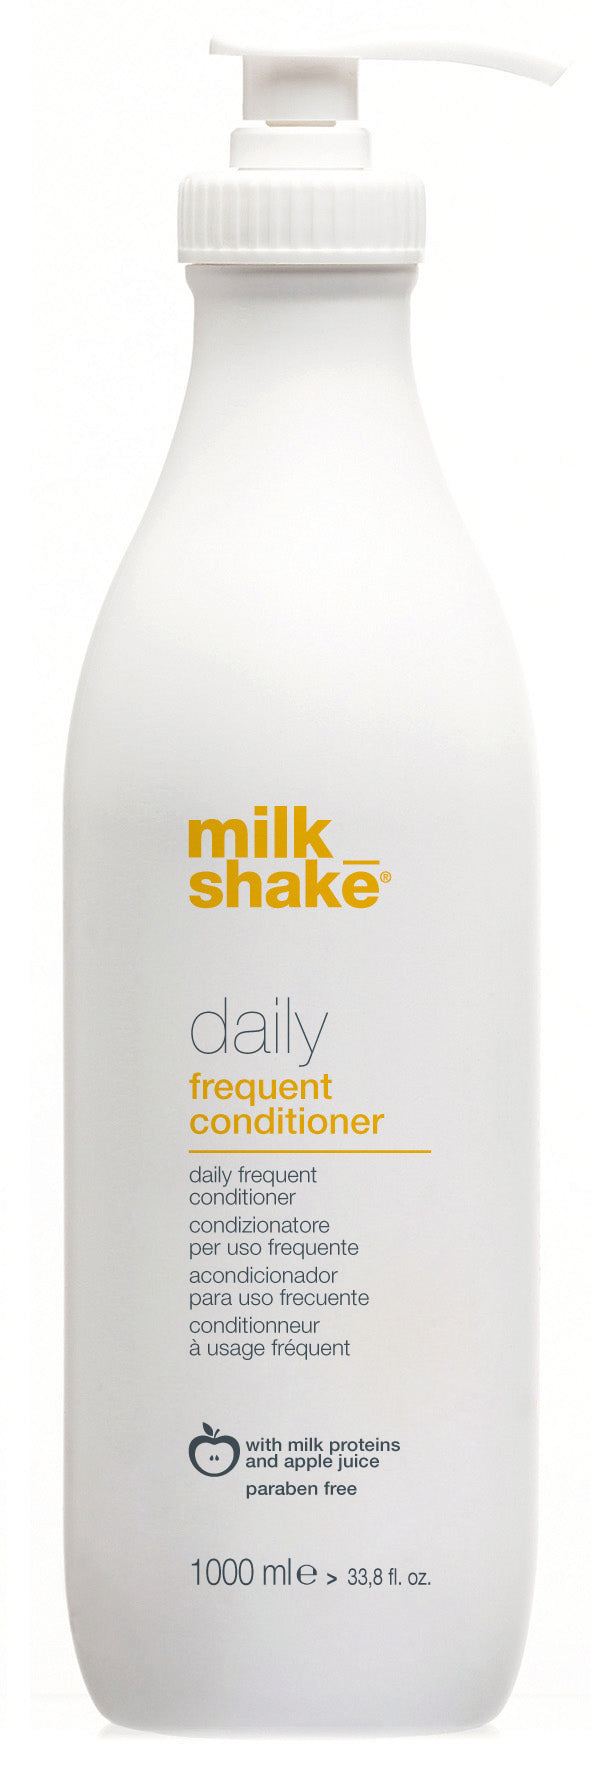 milk_shake daily frequent conditioner 1L